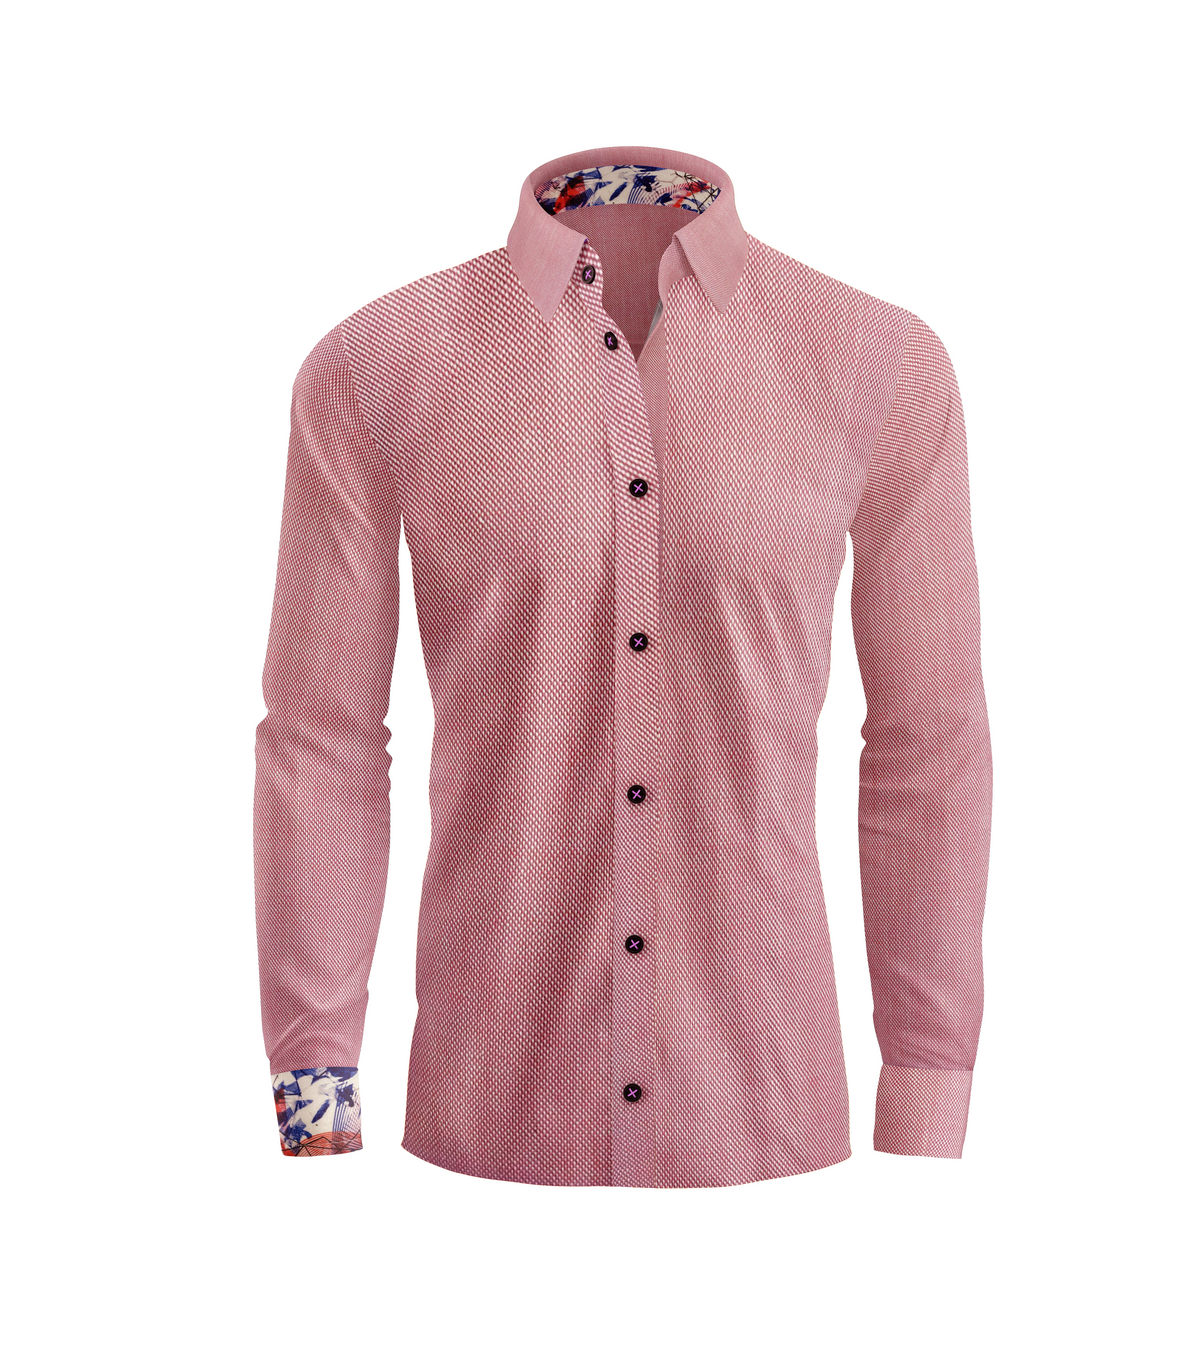 Vercini Coral Textured Limited Edition Cotton Dress Shirt